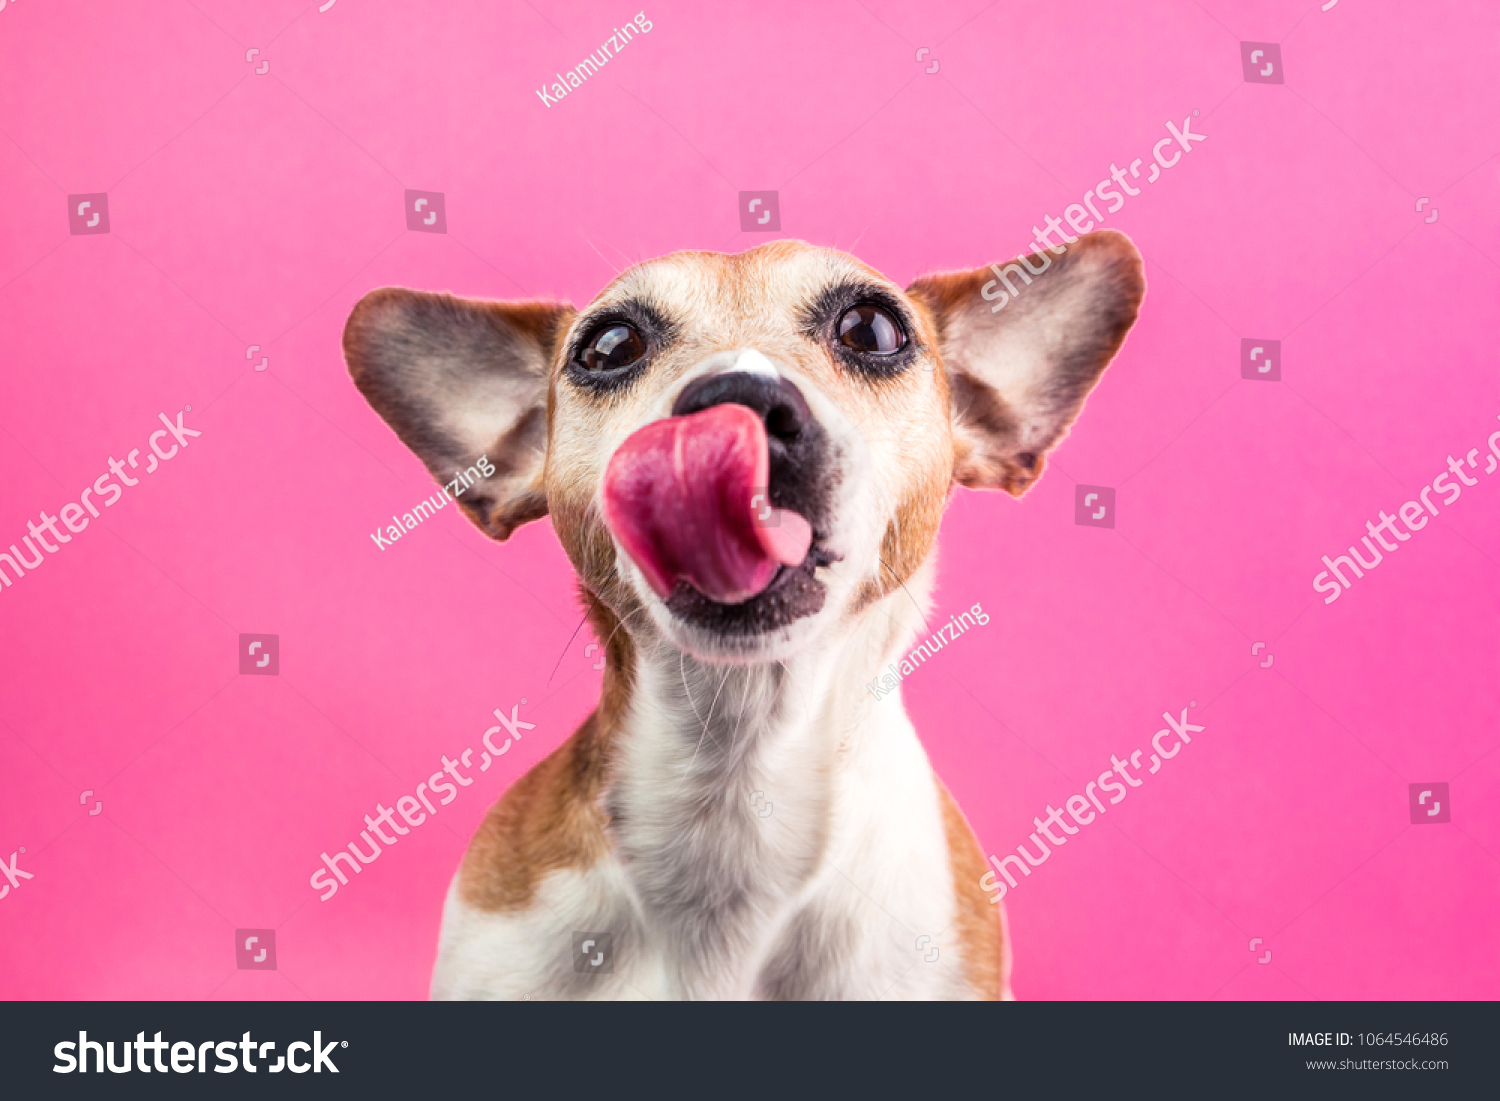 Licking cute dog on pink background. Hungry face. Want delicious pet food. Tasty lanch time #1064546486